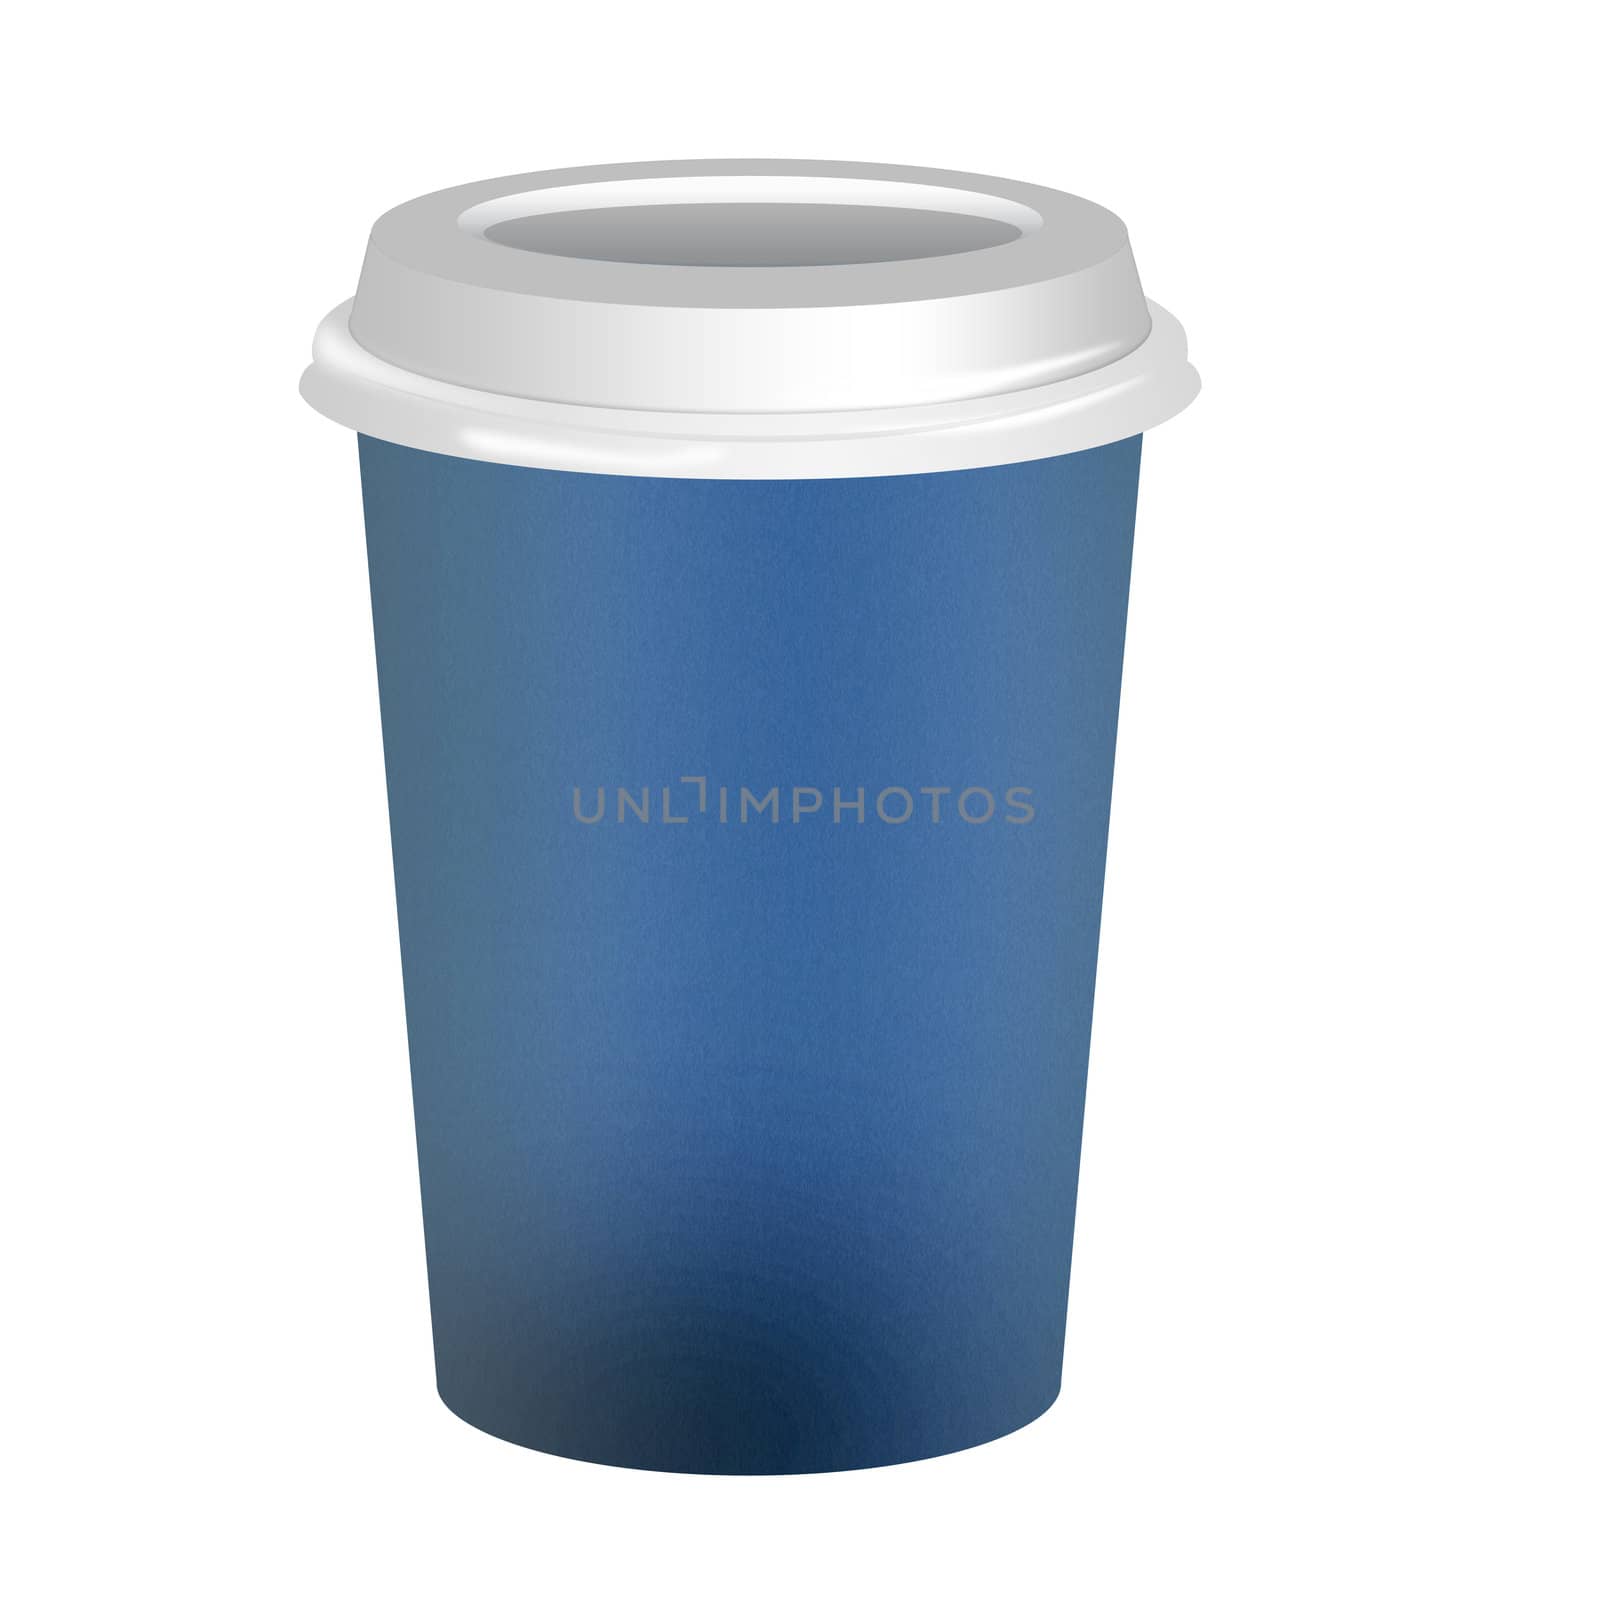 Takeaway coffee cup over white background